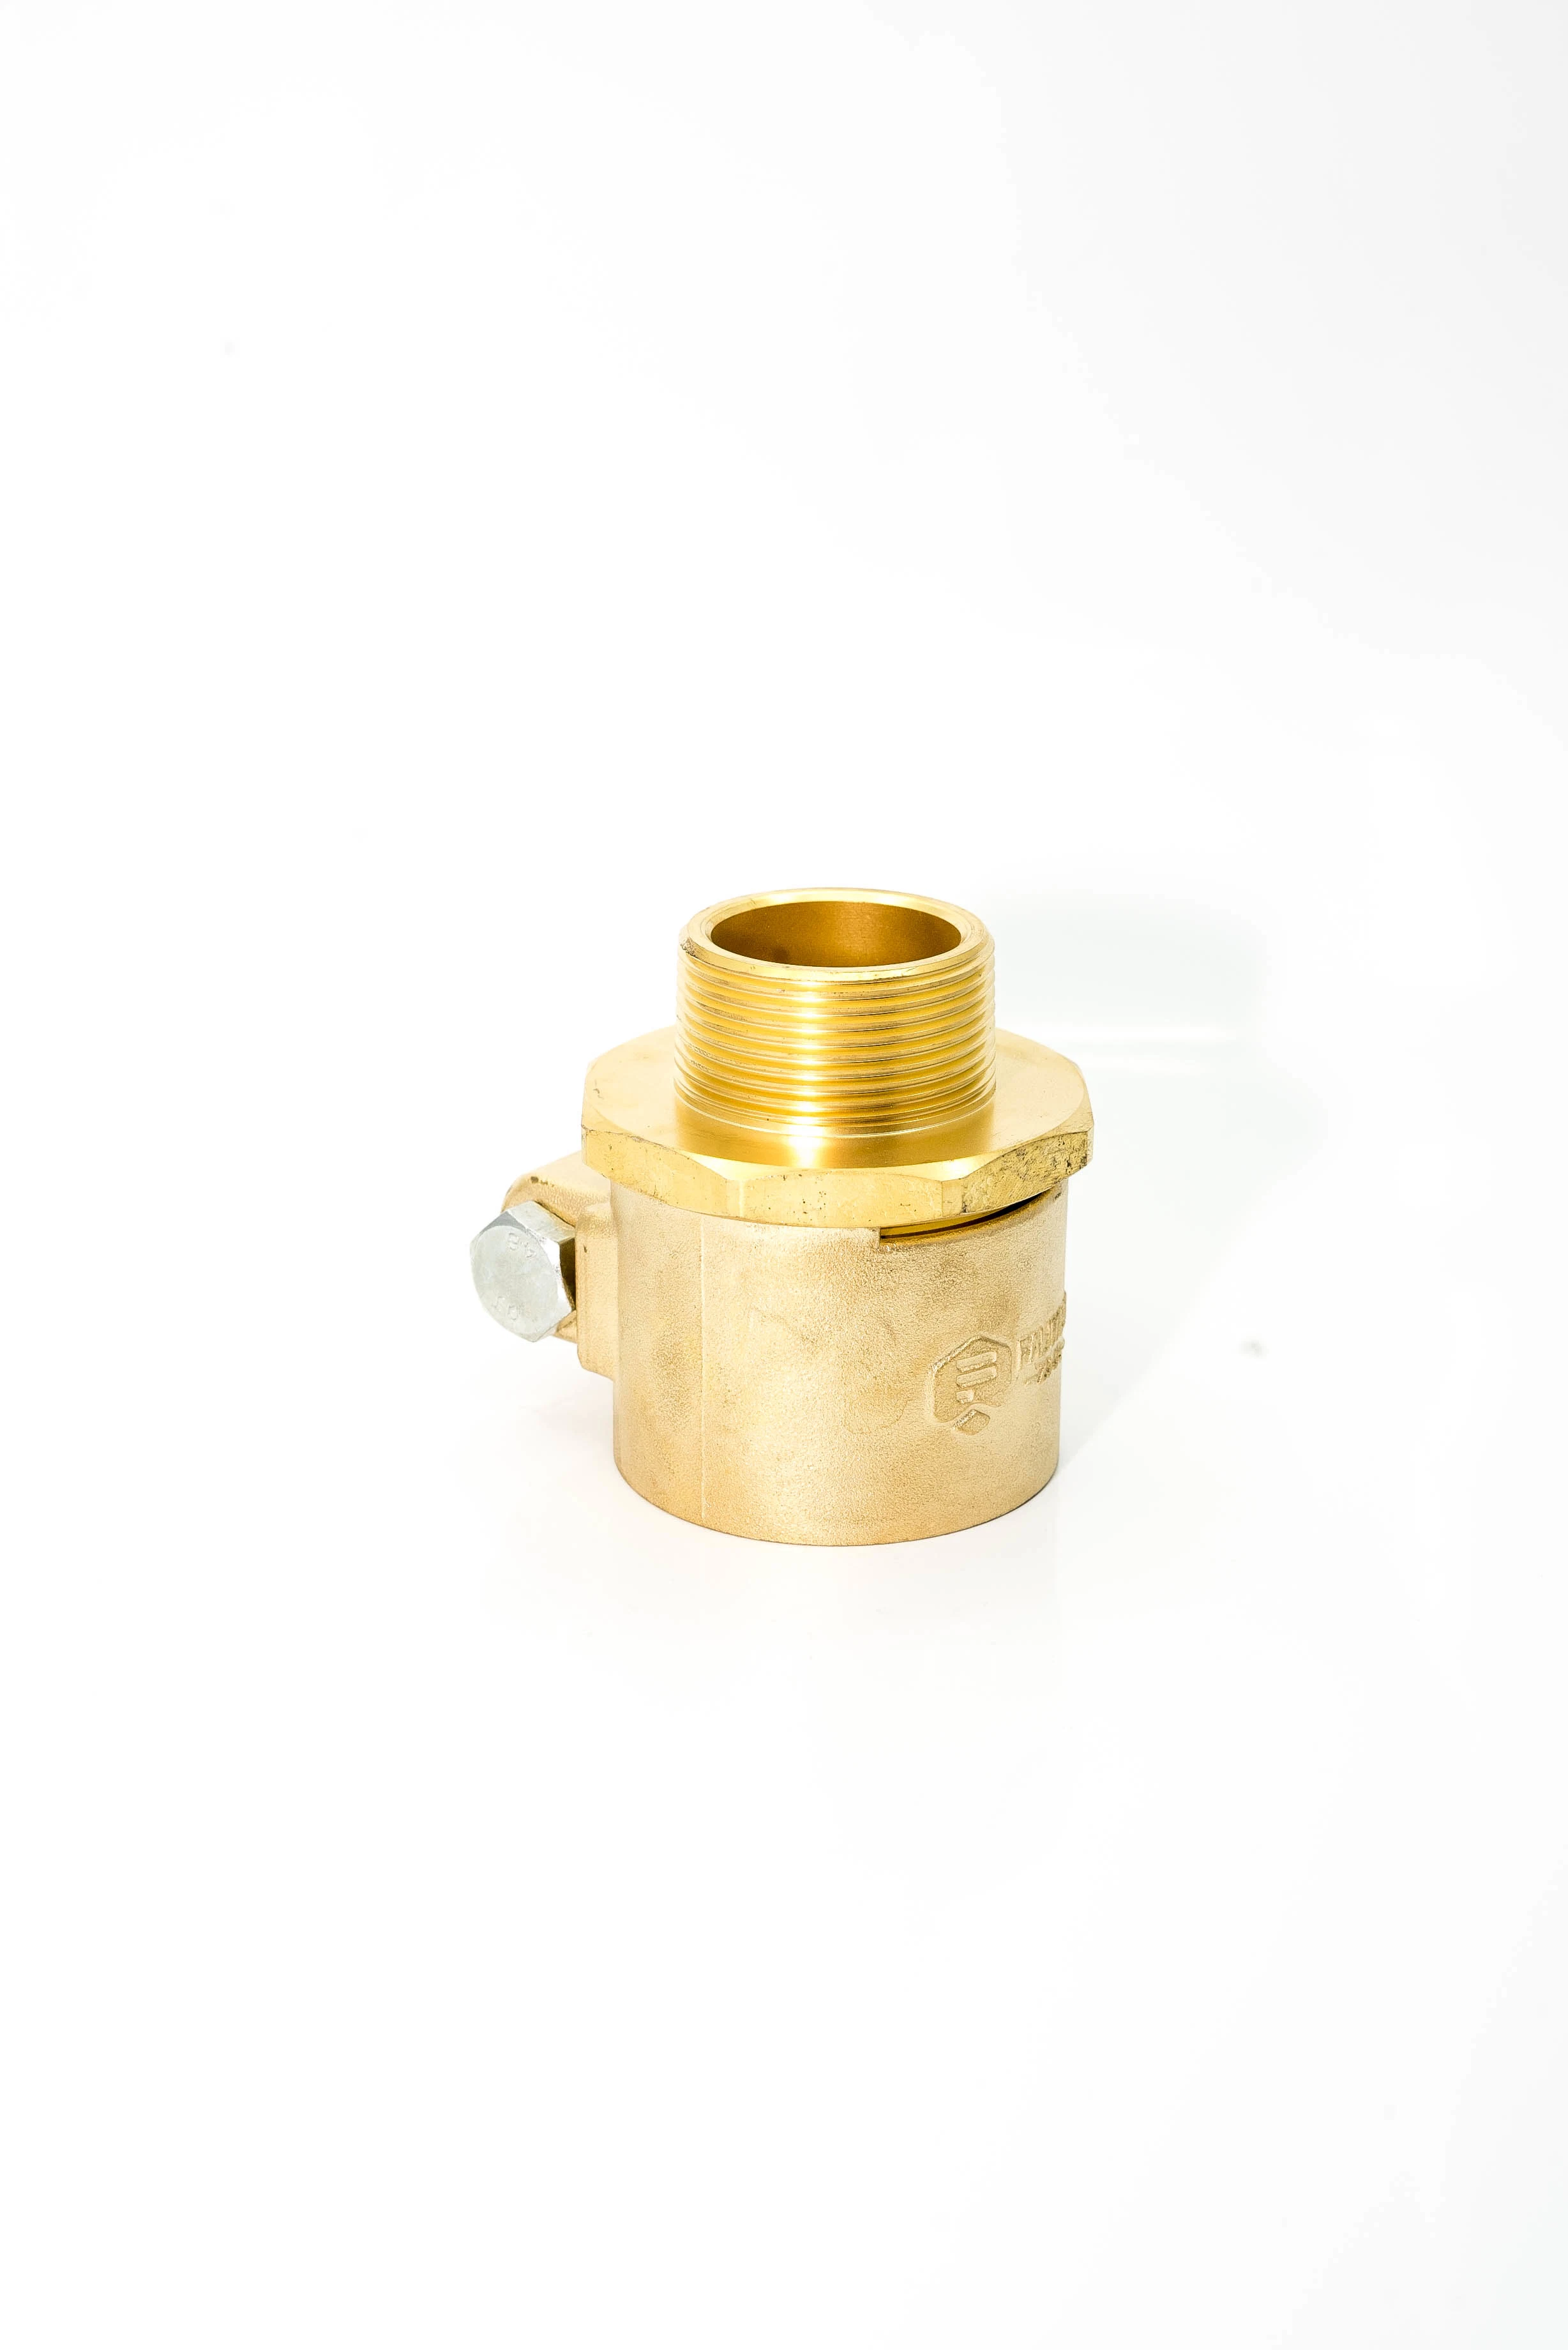 Copper Threaded Joint Metal Joint for Oil Tube